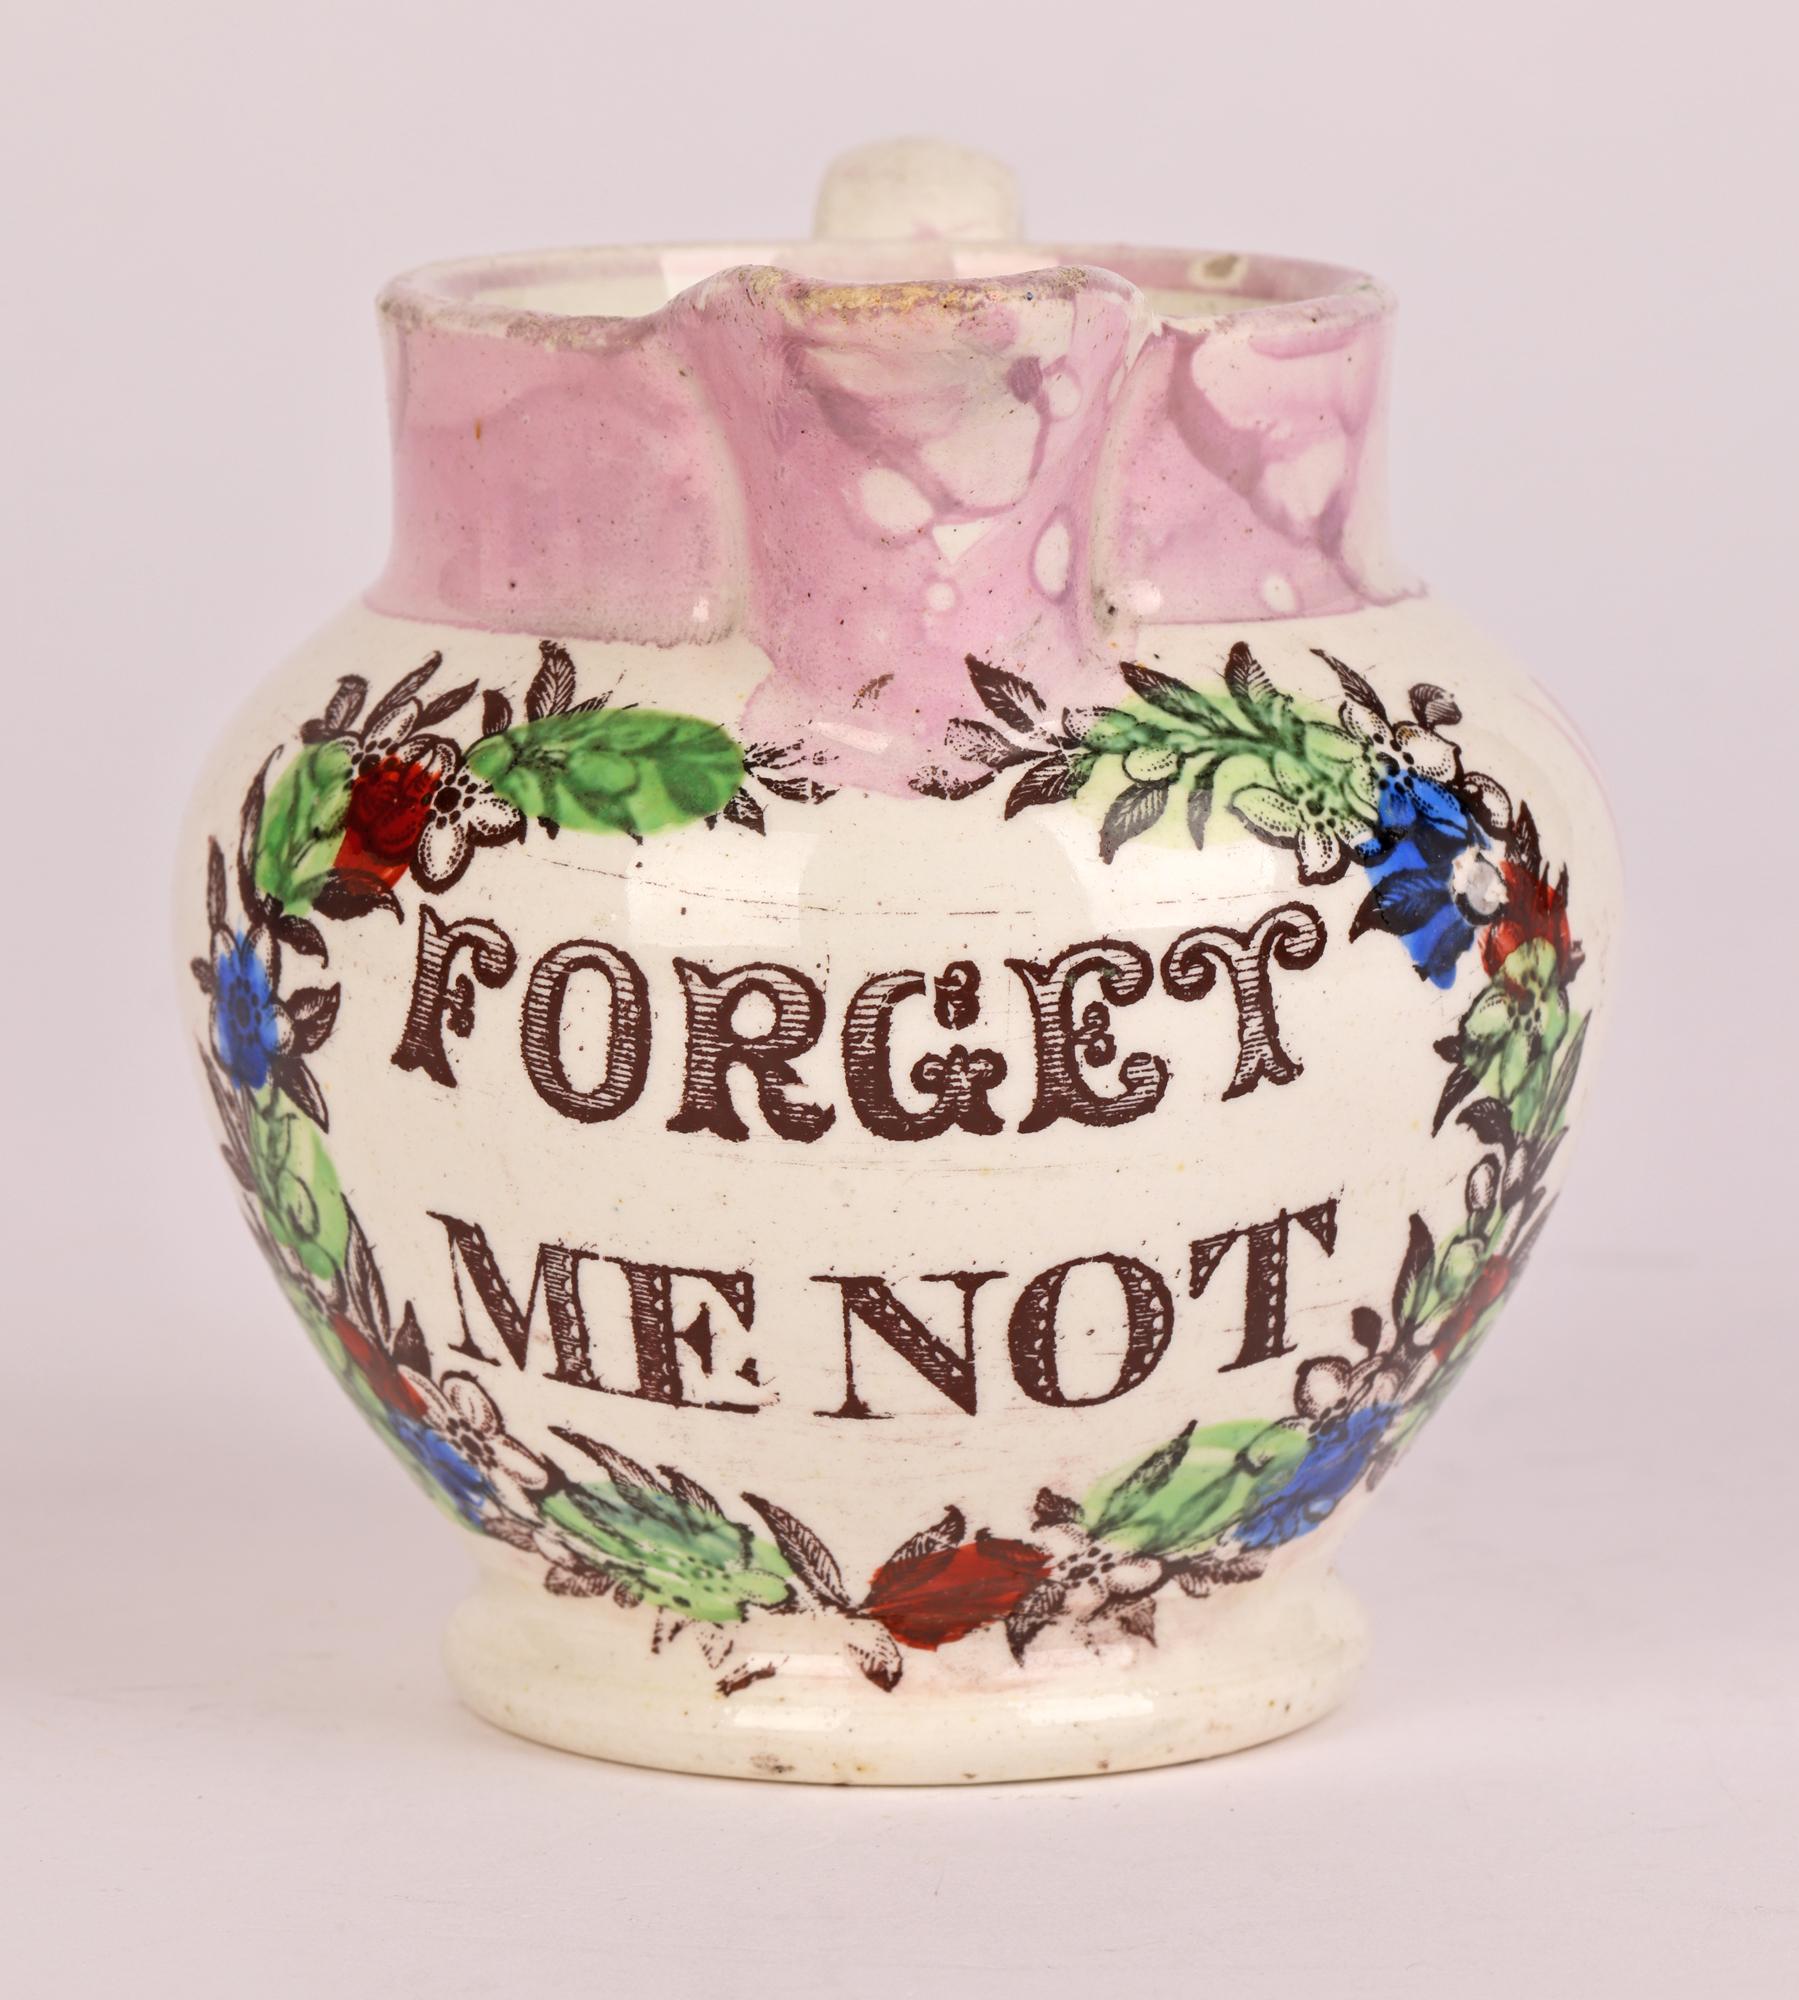 A scarce antique English, possibly Yorkshire or Sunderland lustre pearlware pottery cream jug decorated with the words FORGET ME NOT dating from around 1820-30. The small and lightly potted jug is of rounded bulbous shape standing raised on a narrow